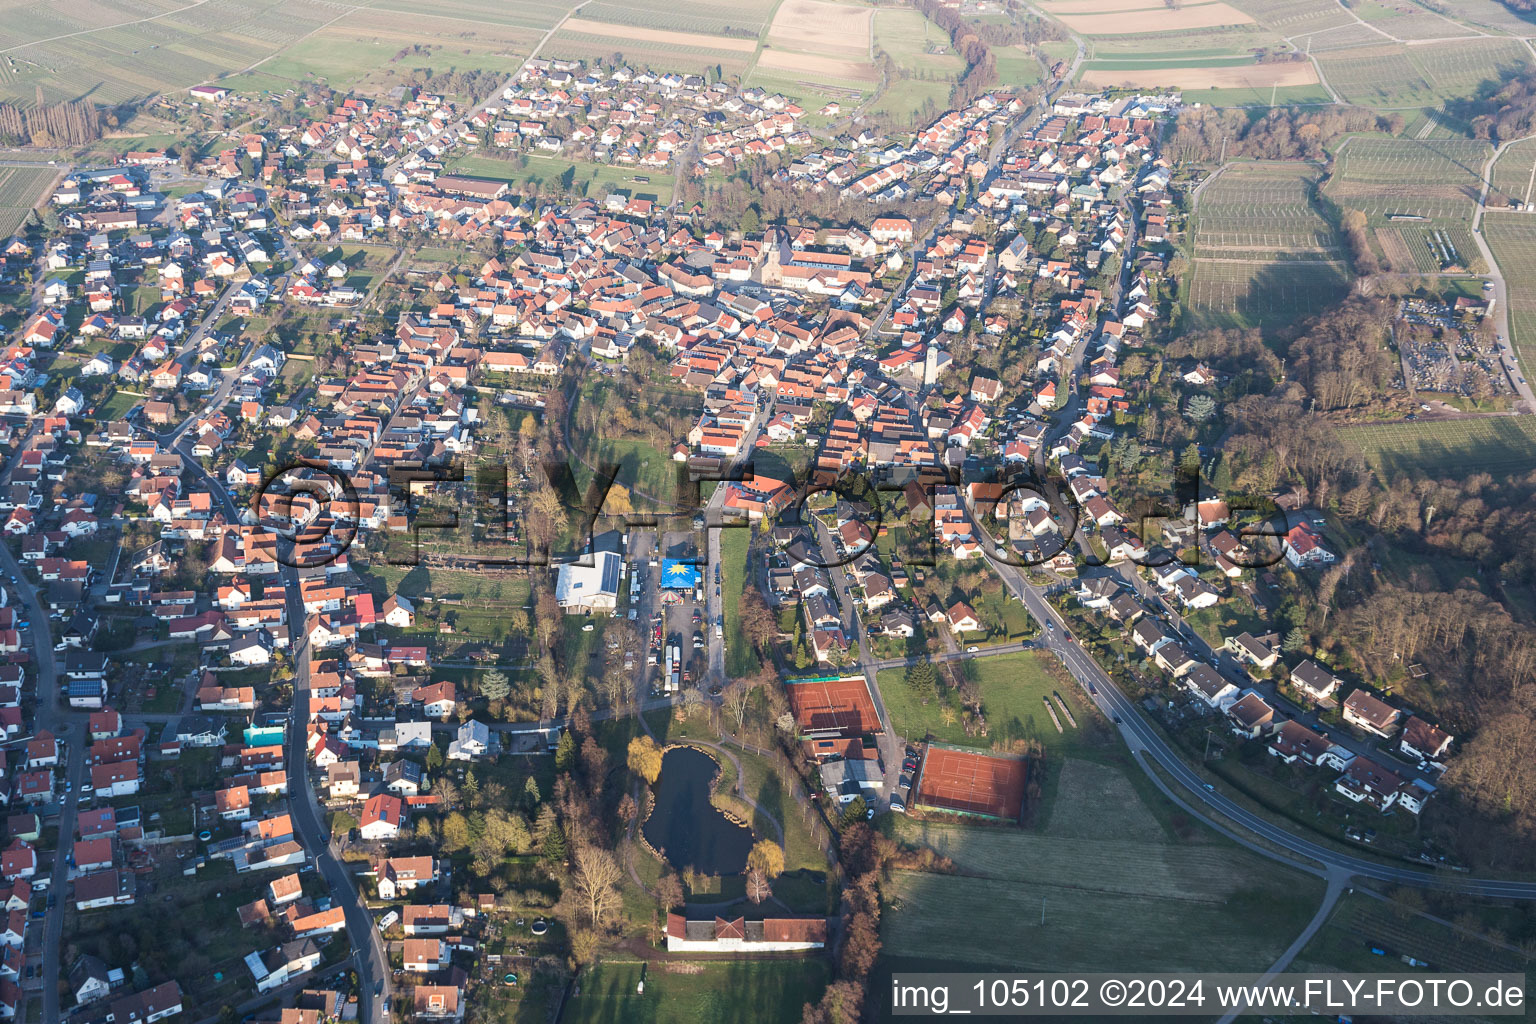 Klingenmünster in the state Rhineland-Palatinate, Germany seen from above